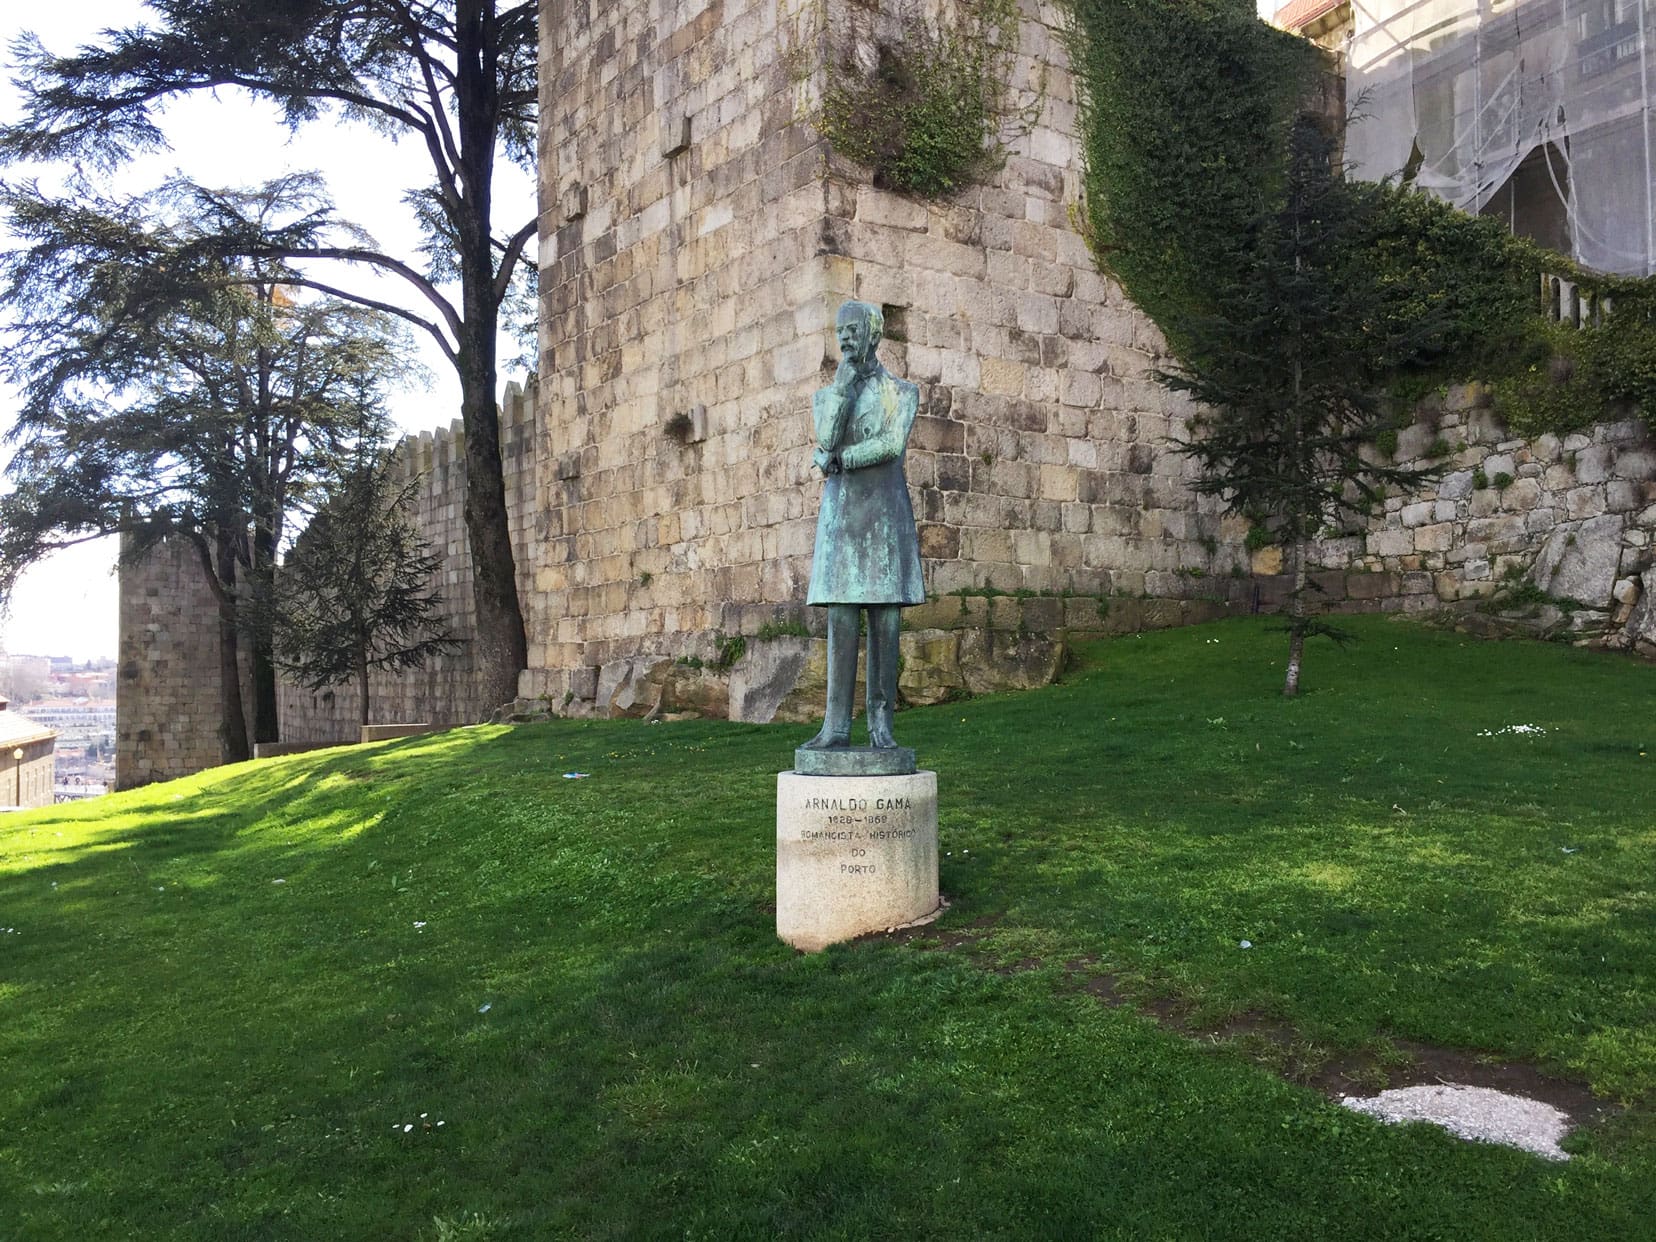 Bronze statue of Arnaldo Do Gama a Portuguese writer situated on a grassy bank in front of the medieval city walls